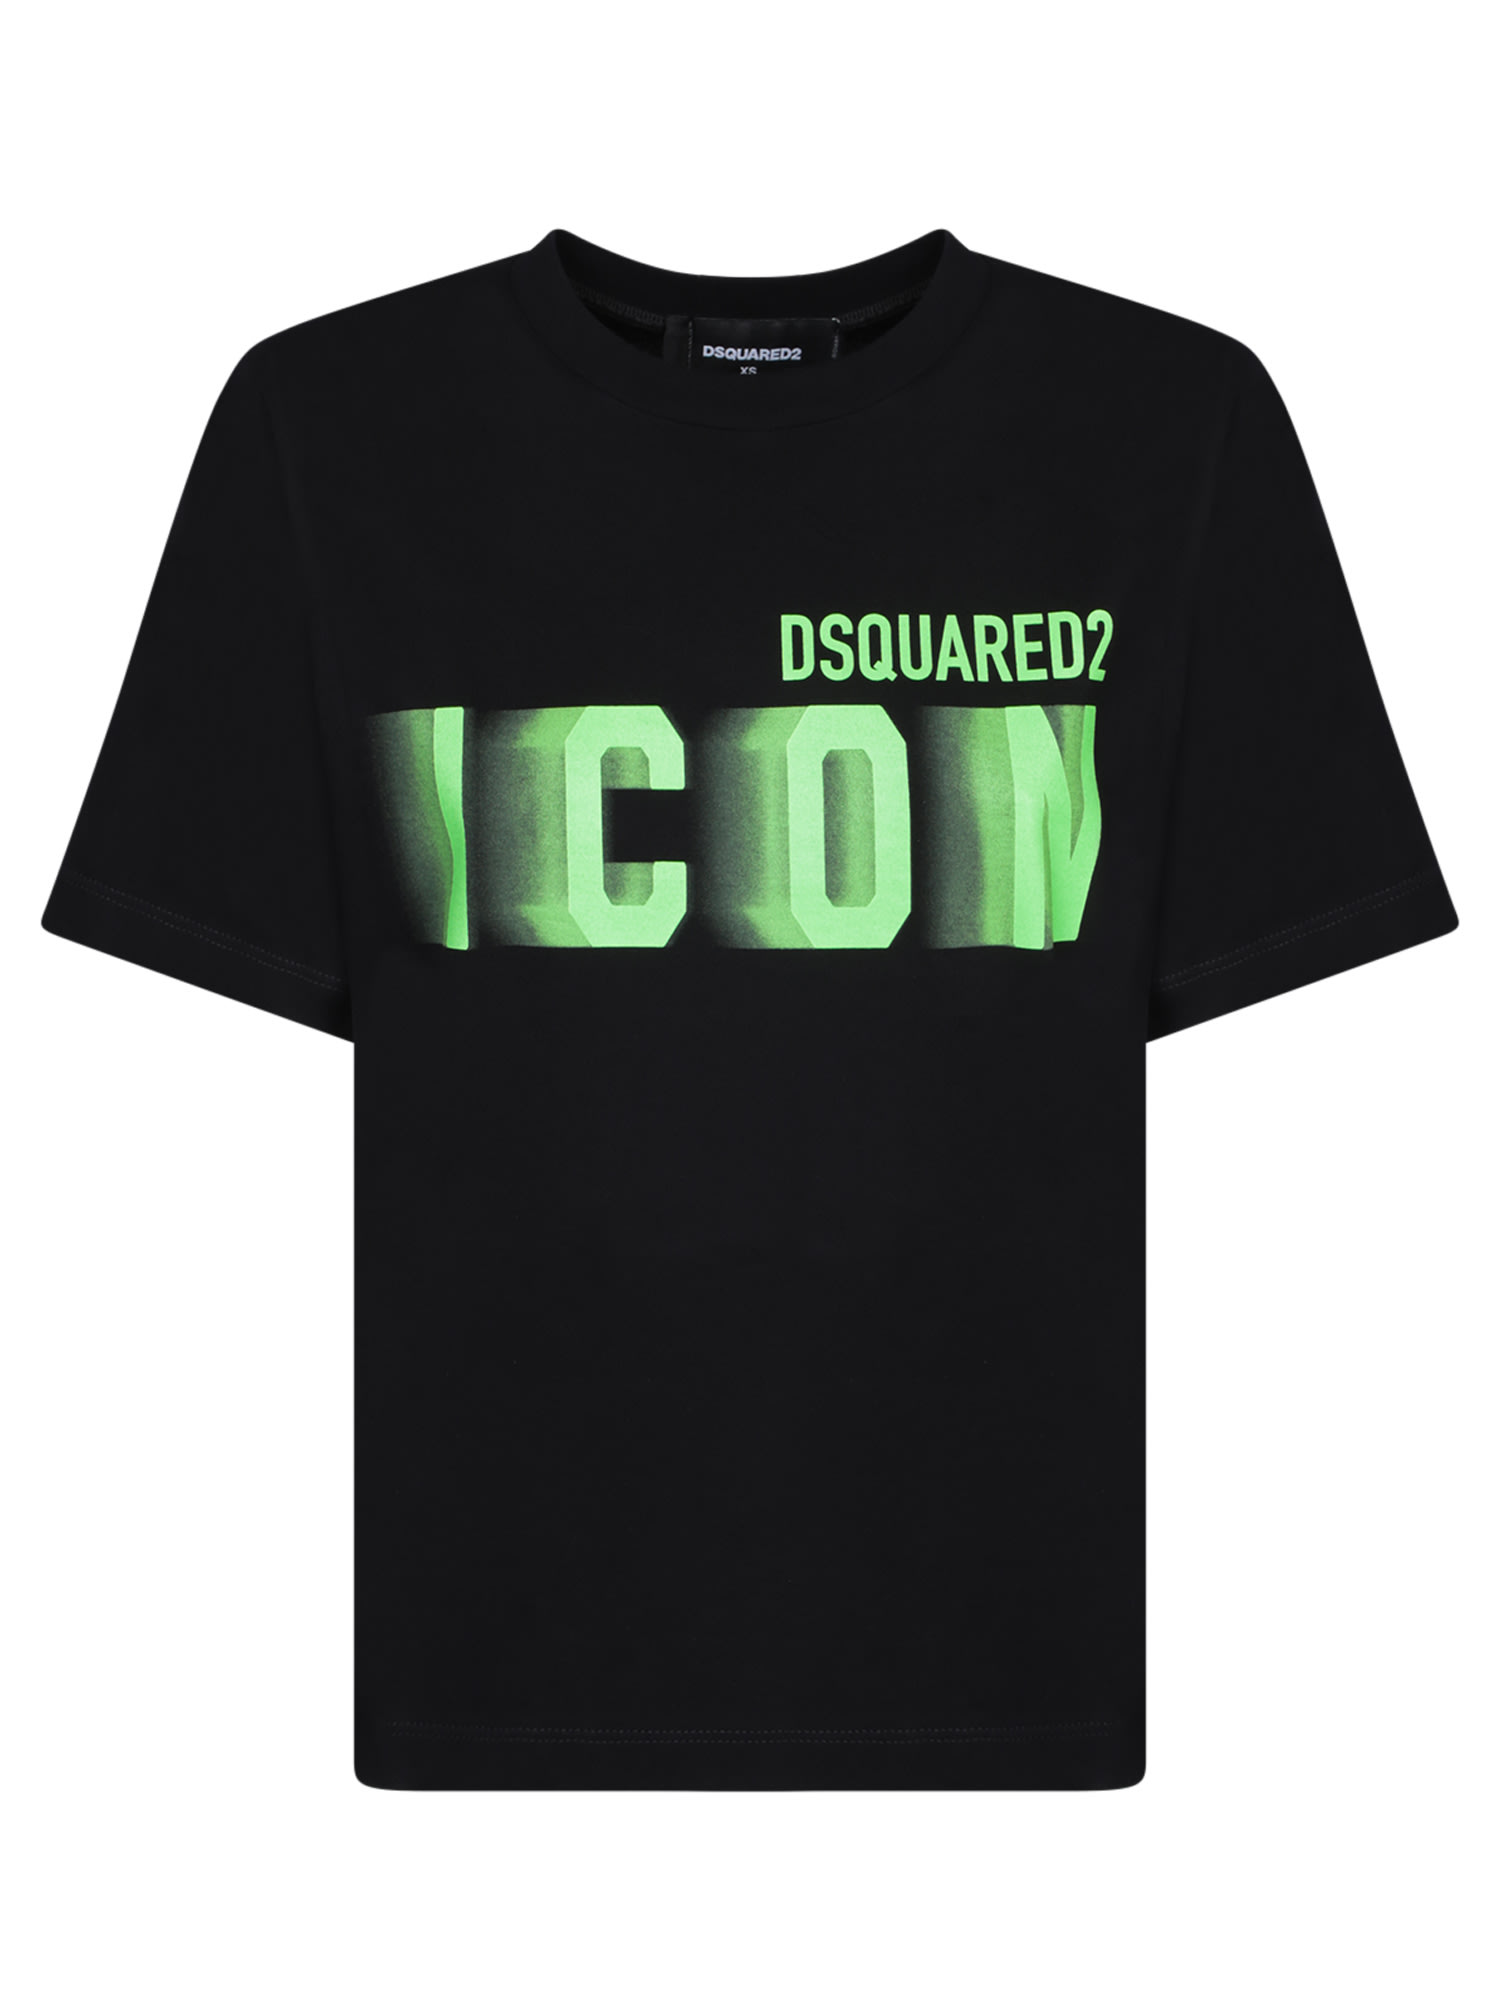 DSQUARED2 ICON BLUR EASY FIT BLACK/GREEN T-SHIRT